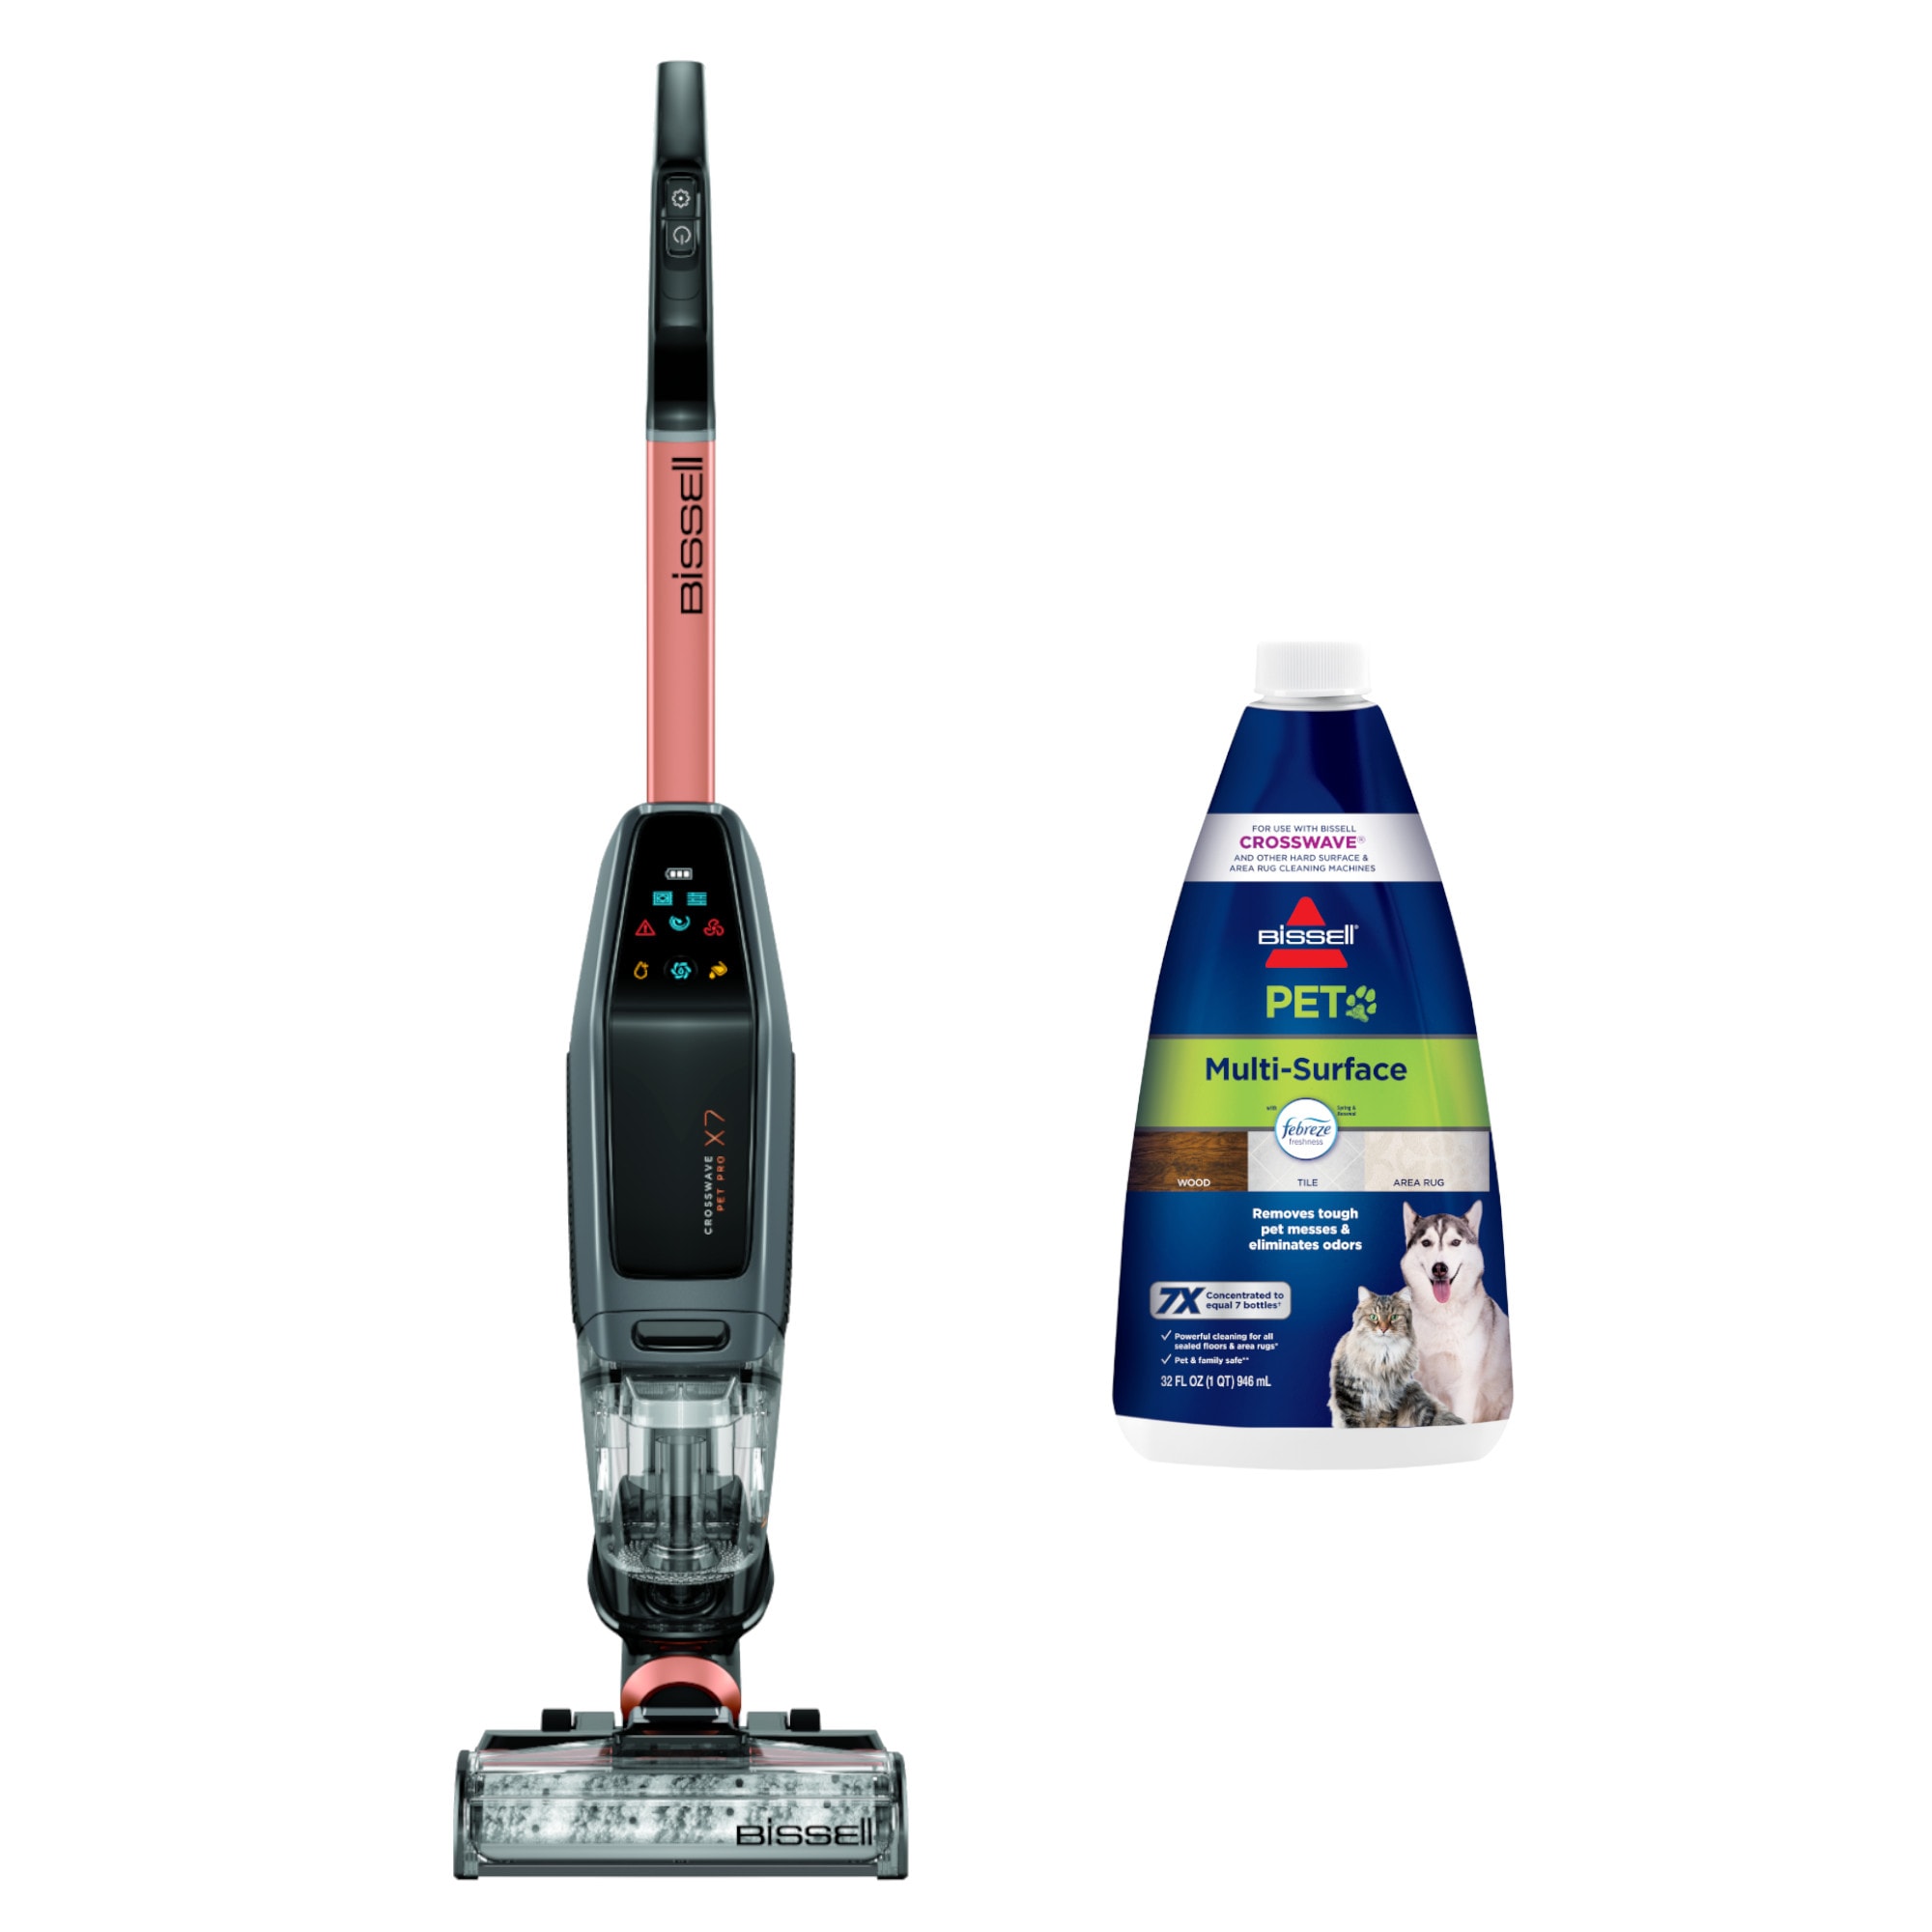  BISSELL CrossWave X7 Cordless Pet Pro Multi-Surface